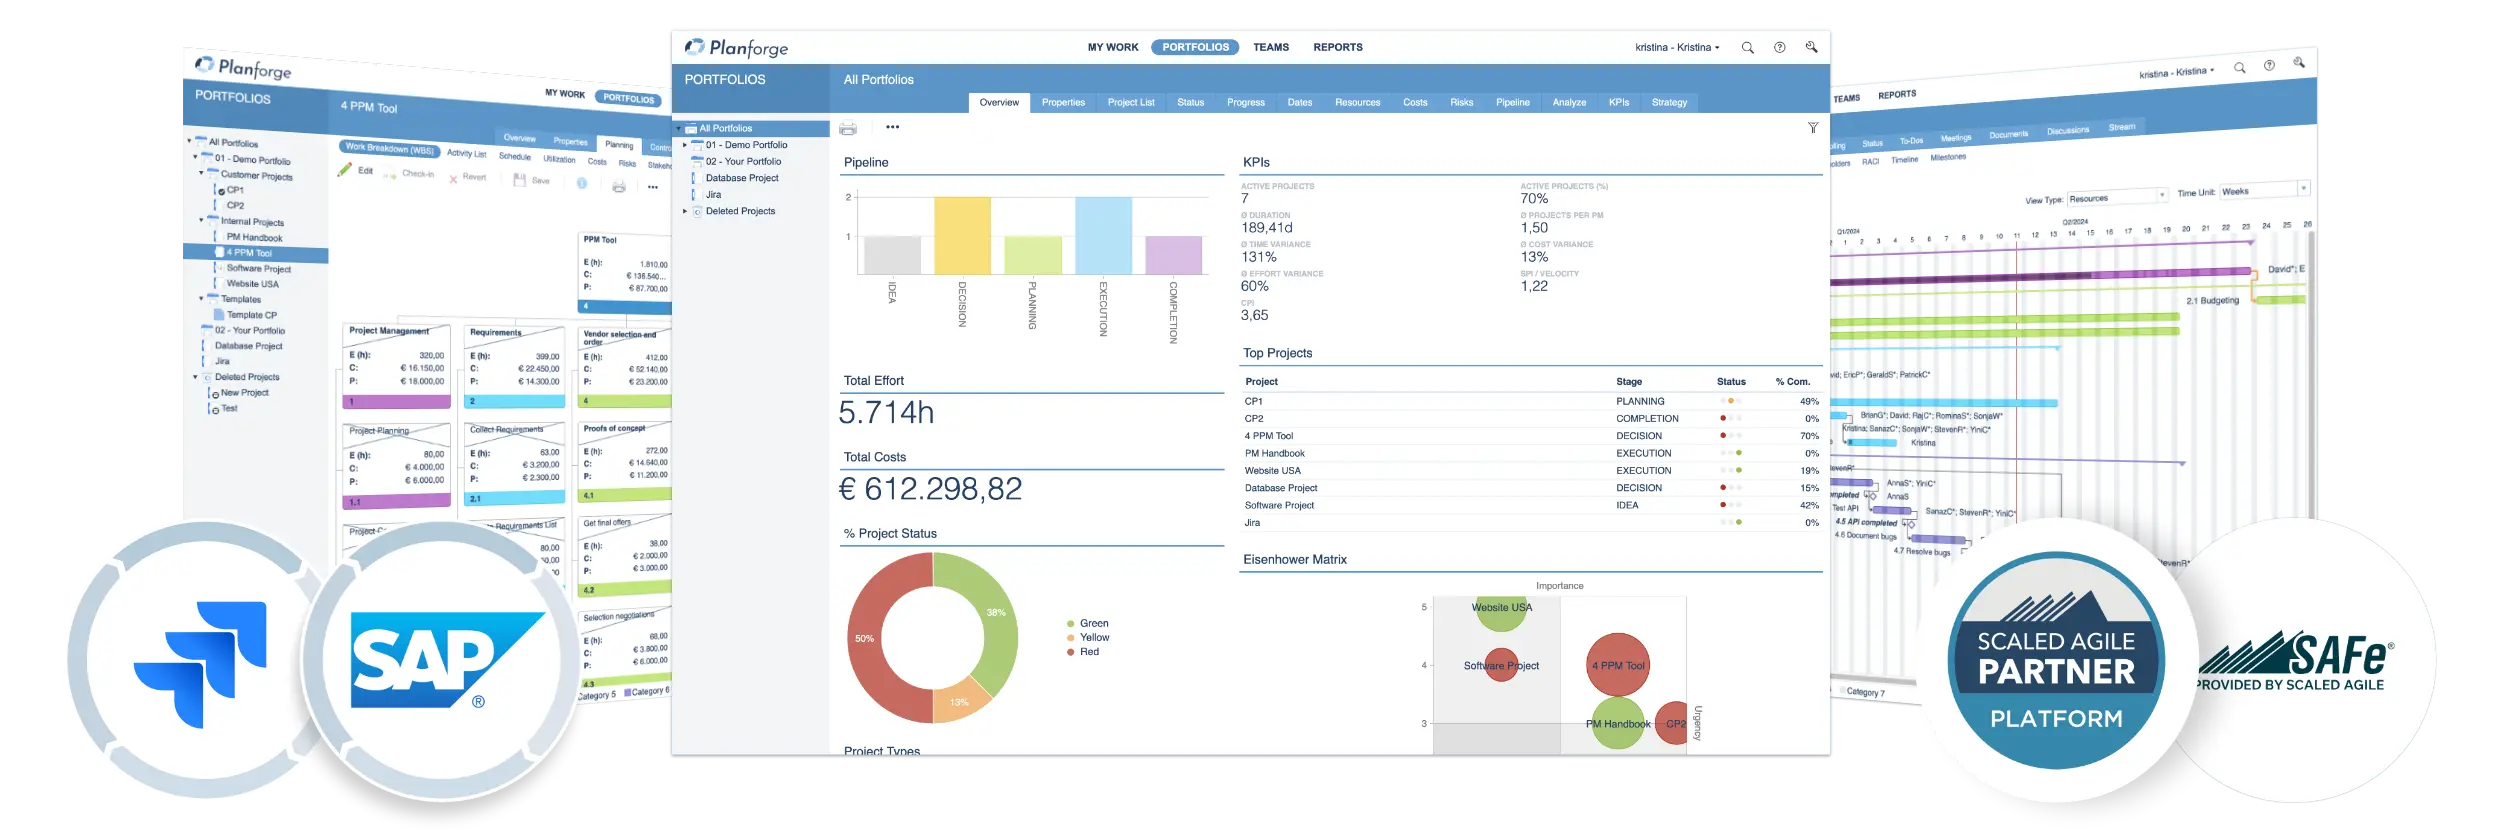 Project and portfolio management software by Planforge